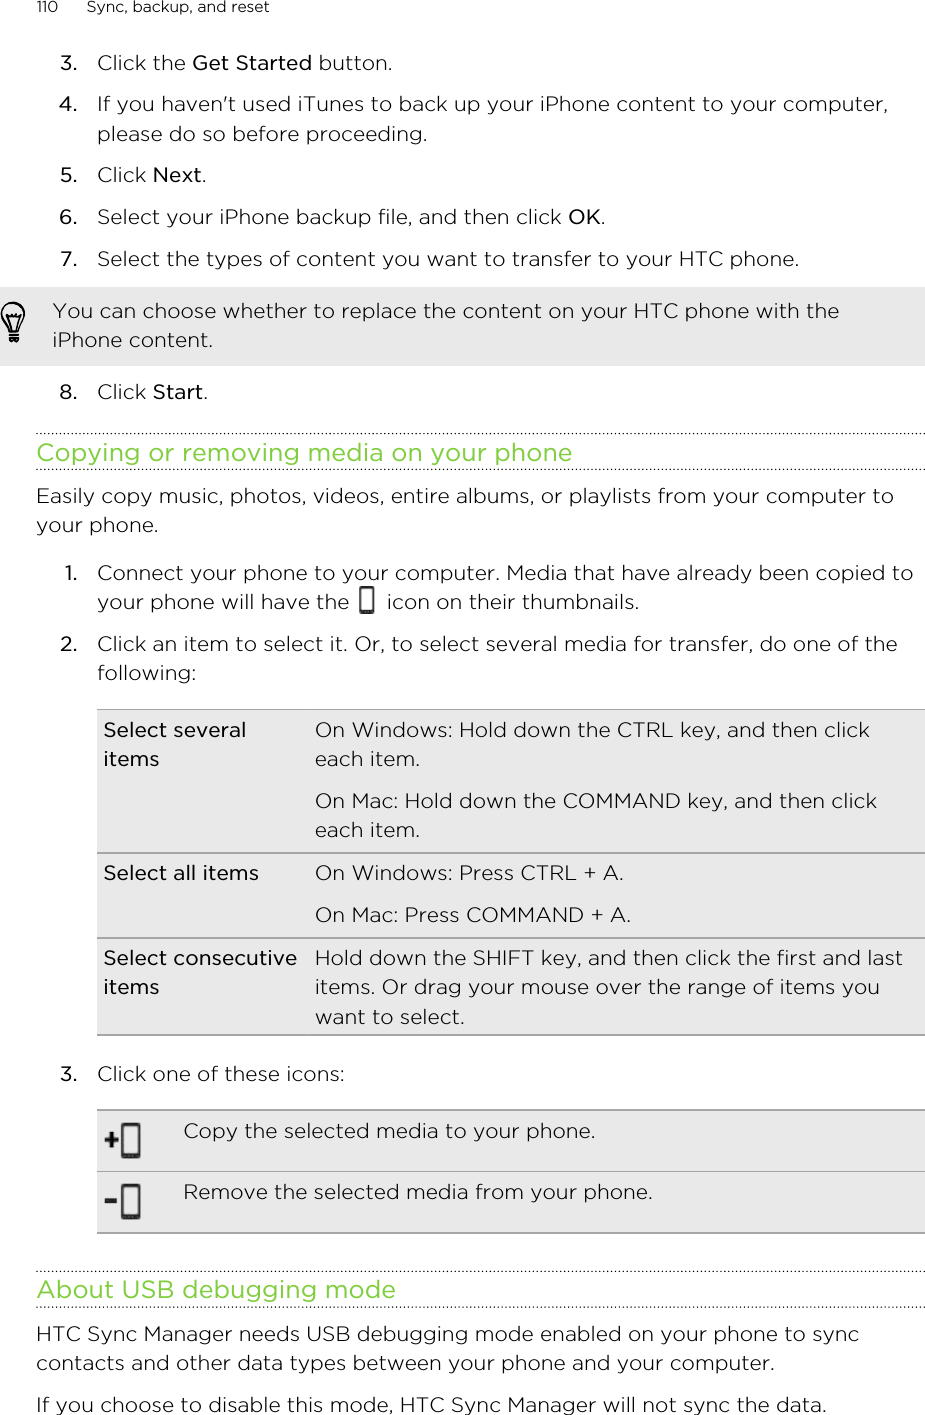 3. Click the Get Started button.4. If you haven&apos;t used iTunes to back up your iPhone content to your computer,please do so before proceeding.5. Click Next.6. Select your iPhone backup file, and then click OK.7. Select the types of content you want to transfer to your HTC phone. You can choose whether to replace the content on your HTC phone with theiPhone content.8. Click Start.Copying or removing media on your phoneEasily copy music, photos, videos, entire albums, or playlists from your computer toyour phone.1. Connect your phone to your computer. Media that have already been copied toyour phone will have the   icon on their thumbnails.2. Click an item to select it. Or, to select several media for transfer, do one of thefollowing:Select severalitemsOn Windows: Hold down the CTRL key, and then clickeach item.On Mac: Hold down the COMMAND key, and then clickeach item.Select all items On Windows: Press CTRL + A.On Mac: Press COMMAND + A.Select consecutiveitemsHold down the SHIFT key, and then click the first and lastitems. Or drag your mouse over the range of items youwant to select.3. Click one of these icons:Copy the selected media to your phone.Remove the selected media from your phone.About USB debugging modeHTC Sync Manager needs USB debugging mode enabled on your phone to synccontacts and other data types between your phone and your computer.If you choose to disable this mode, HTC Sync Manager will not sync the data.110 Sync, backup, and reset